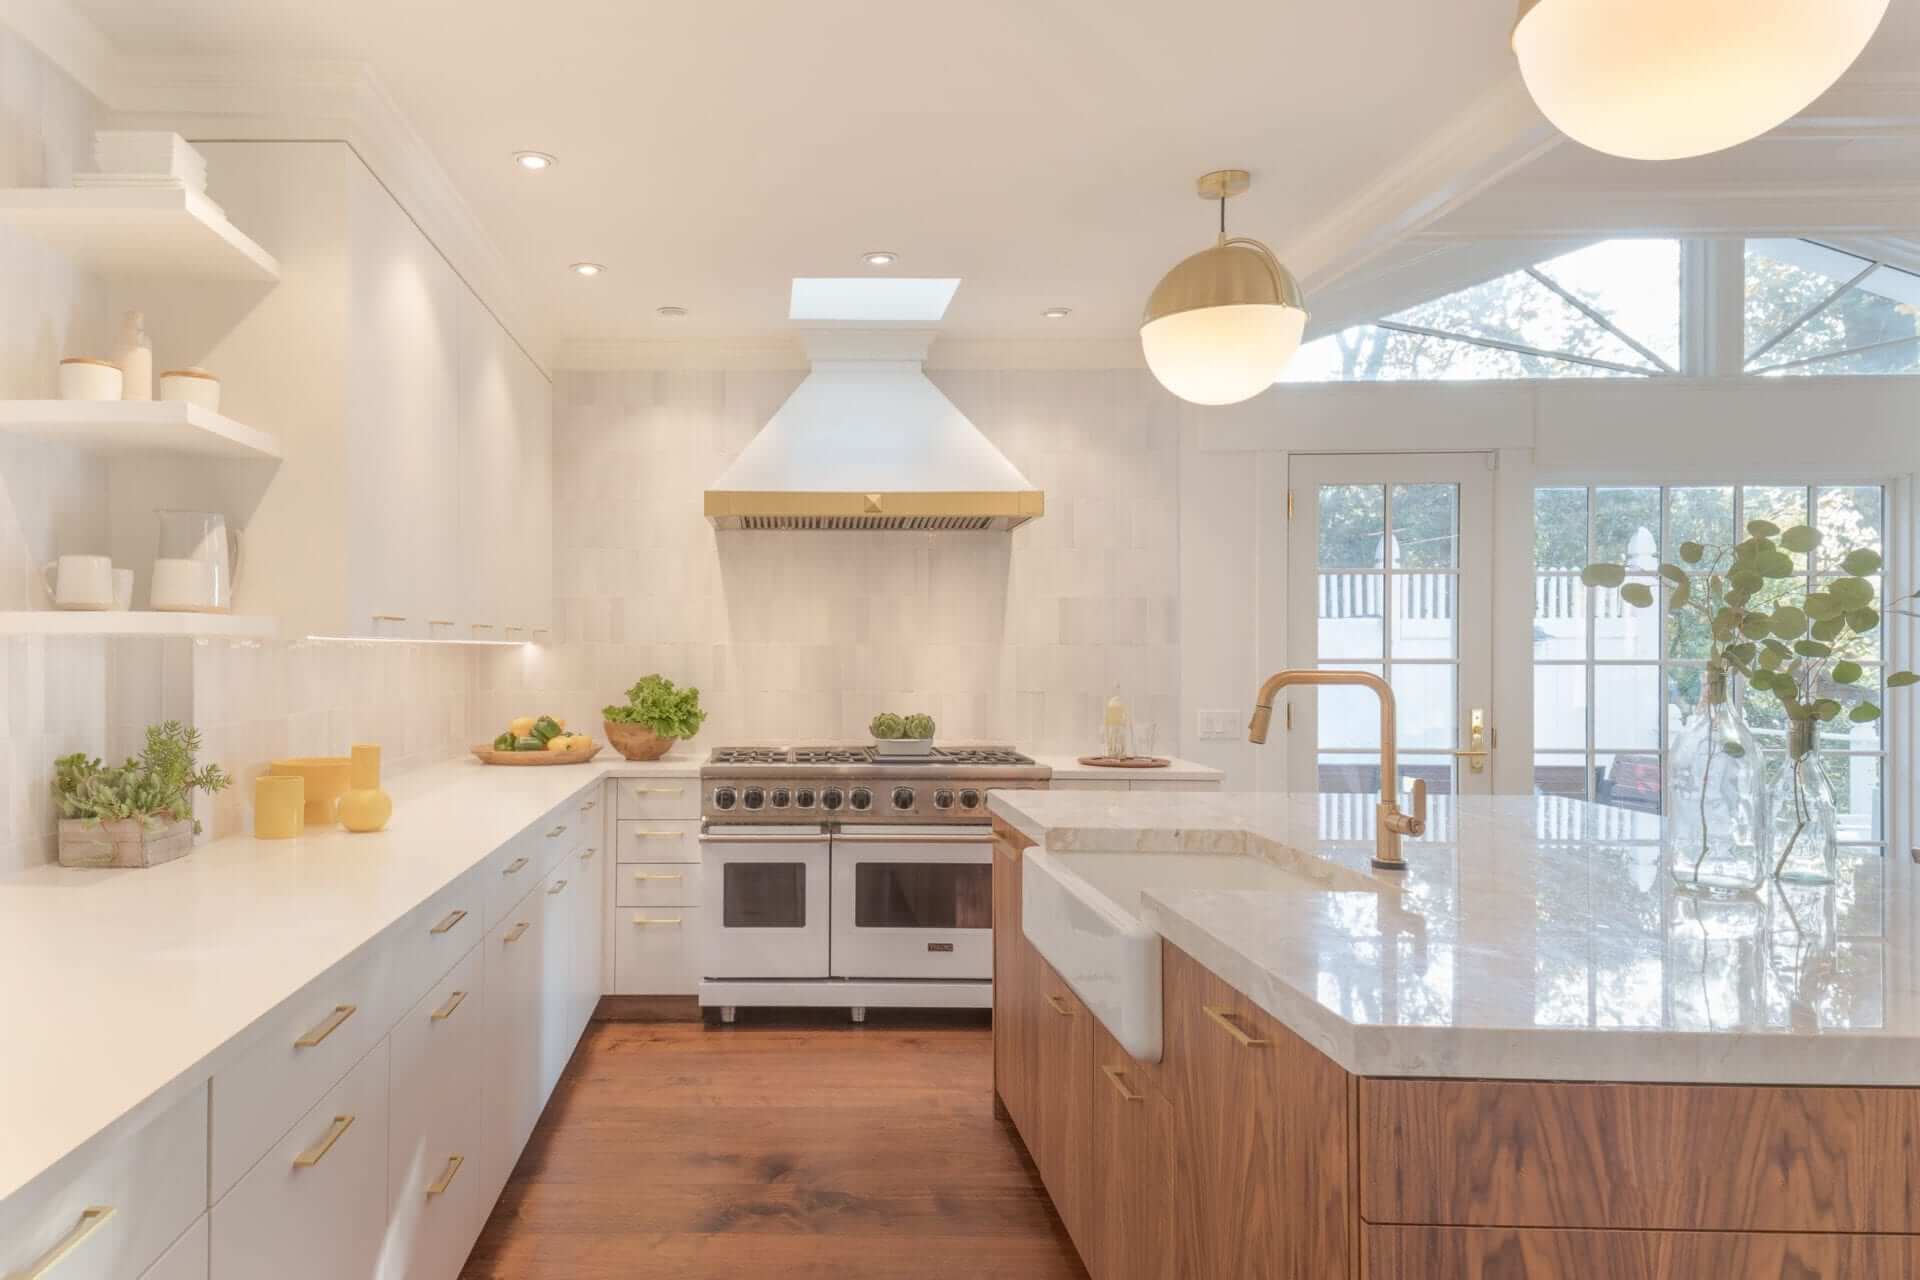 Contemporary kitchen features brass accents, white Rutt Regency cabinetry and white marble topped walnut island.